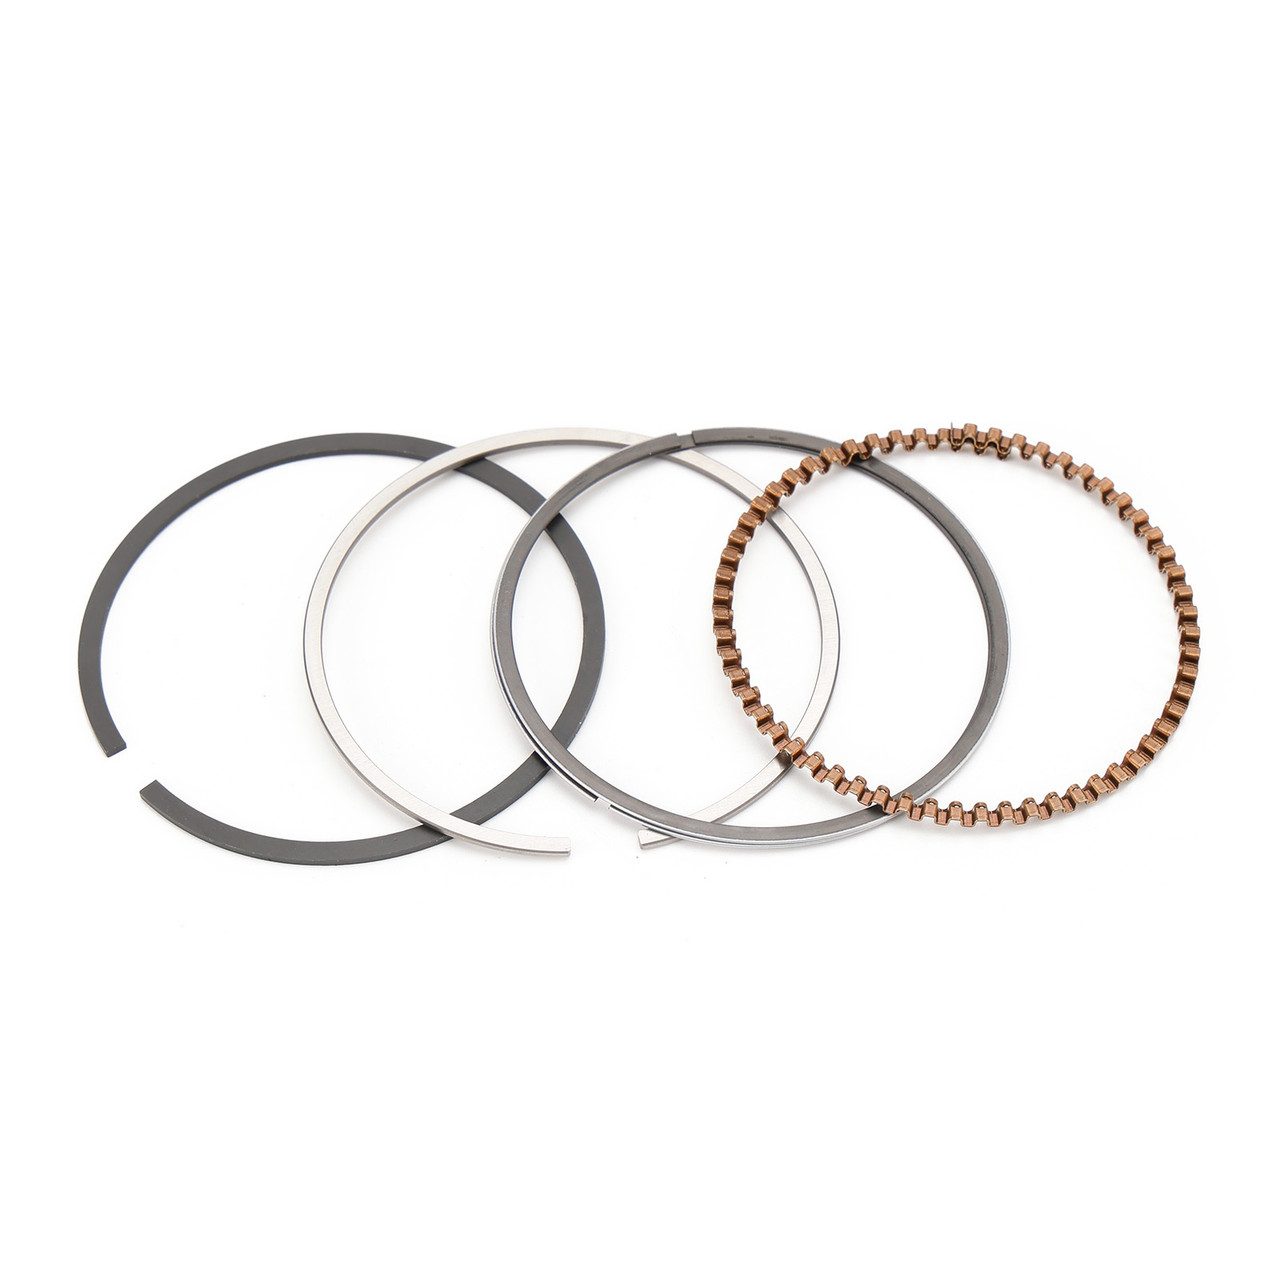 62mm Cylinder Piston Rings Gasket Kit 15mm For Italika Ft150 Rc150 Forza 150